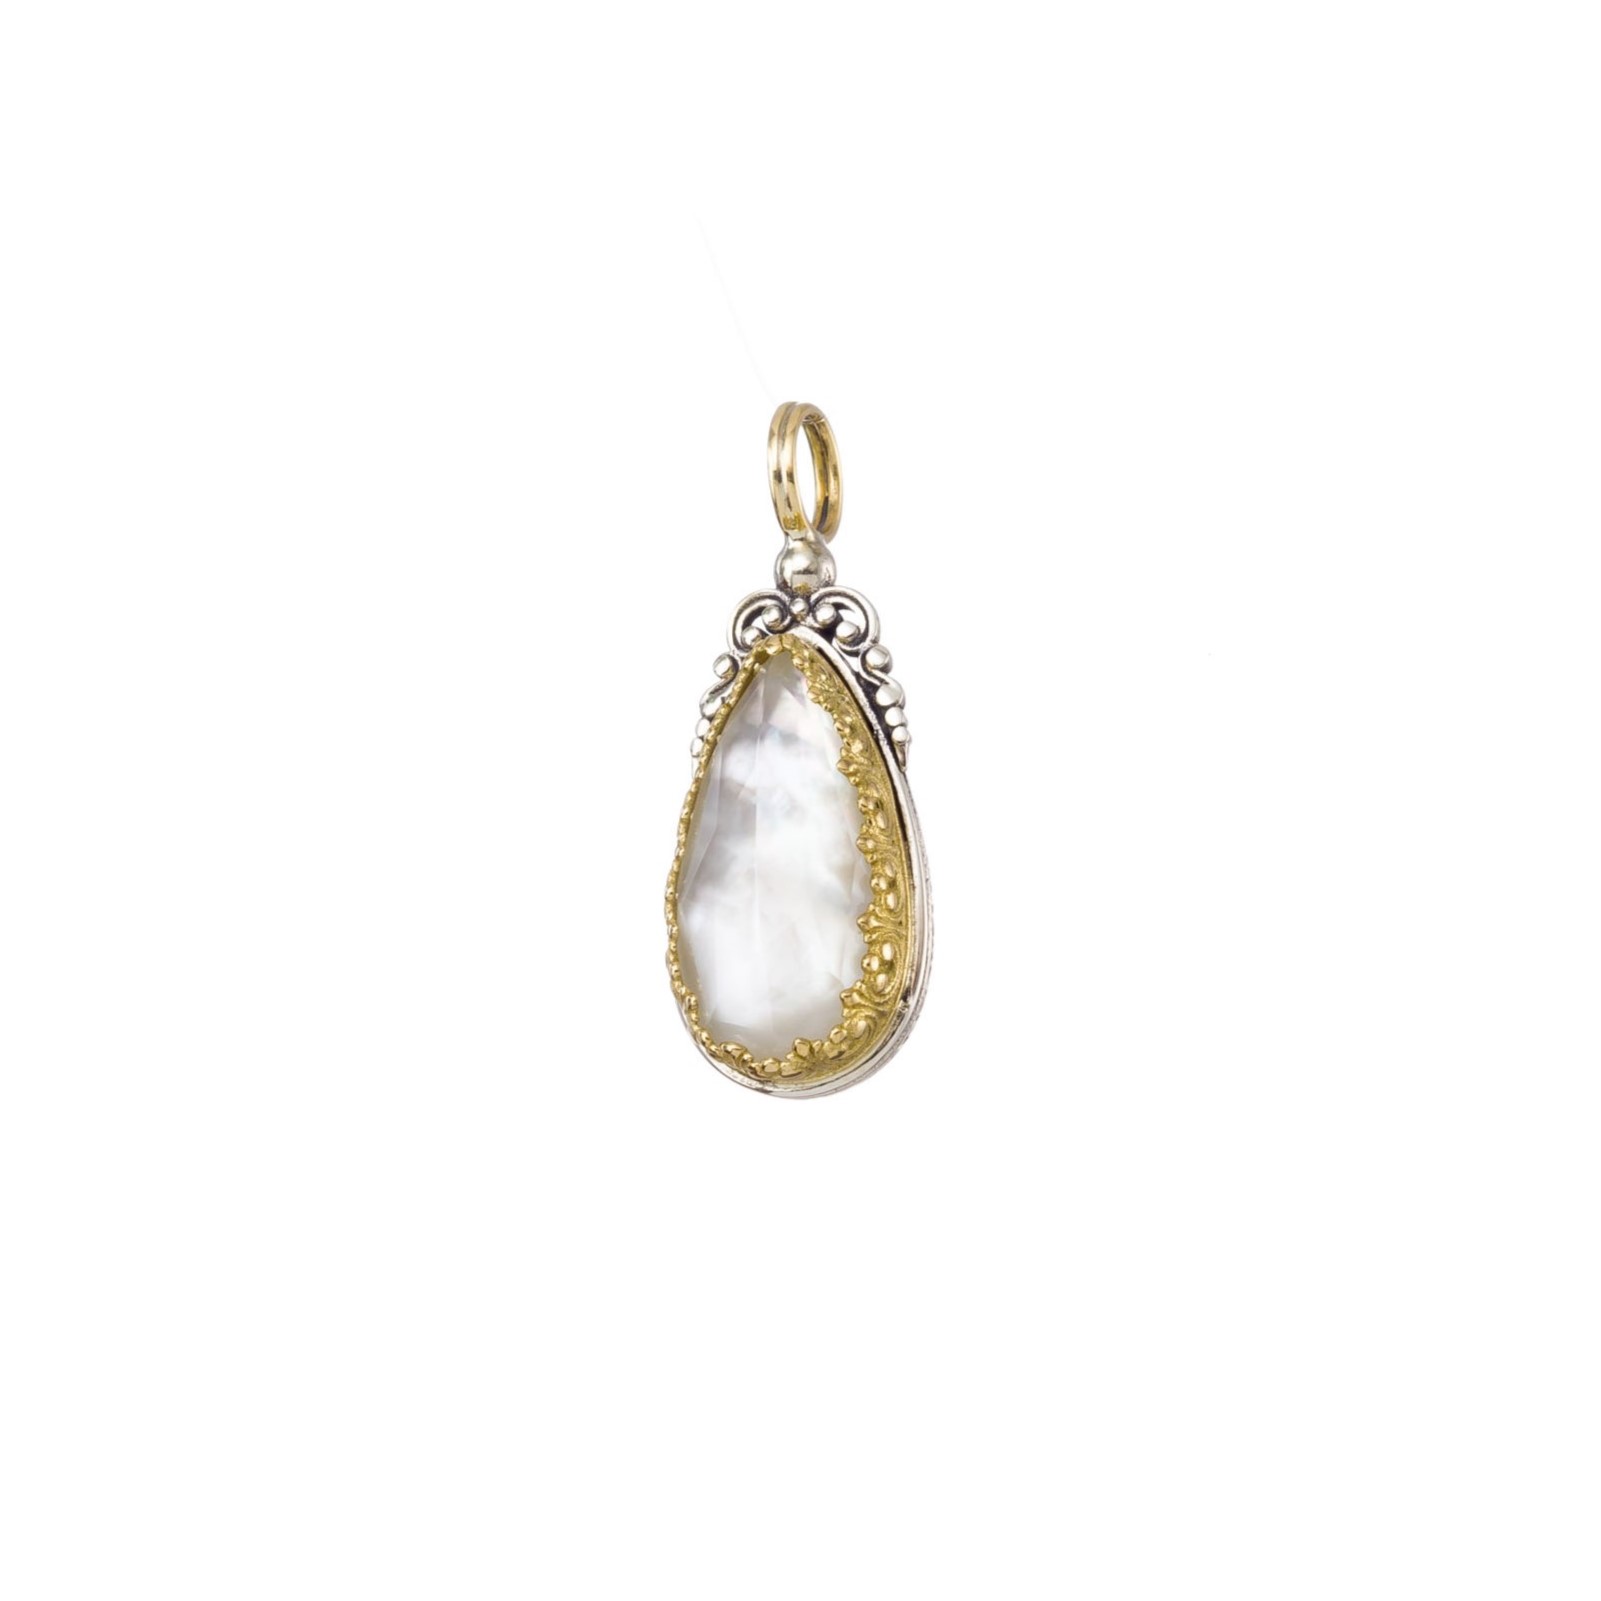 Iris big drop pendant in 18K Gold and Sterling silver with doublet stone